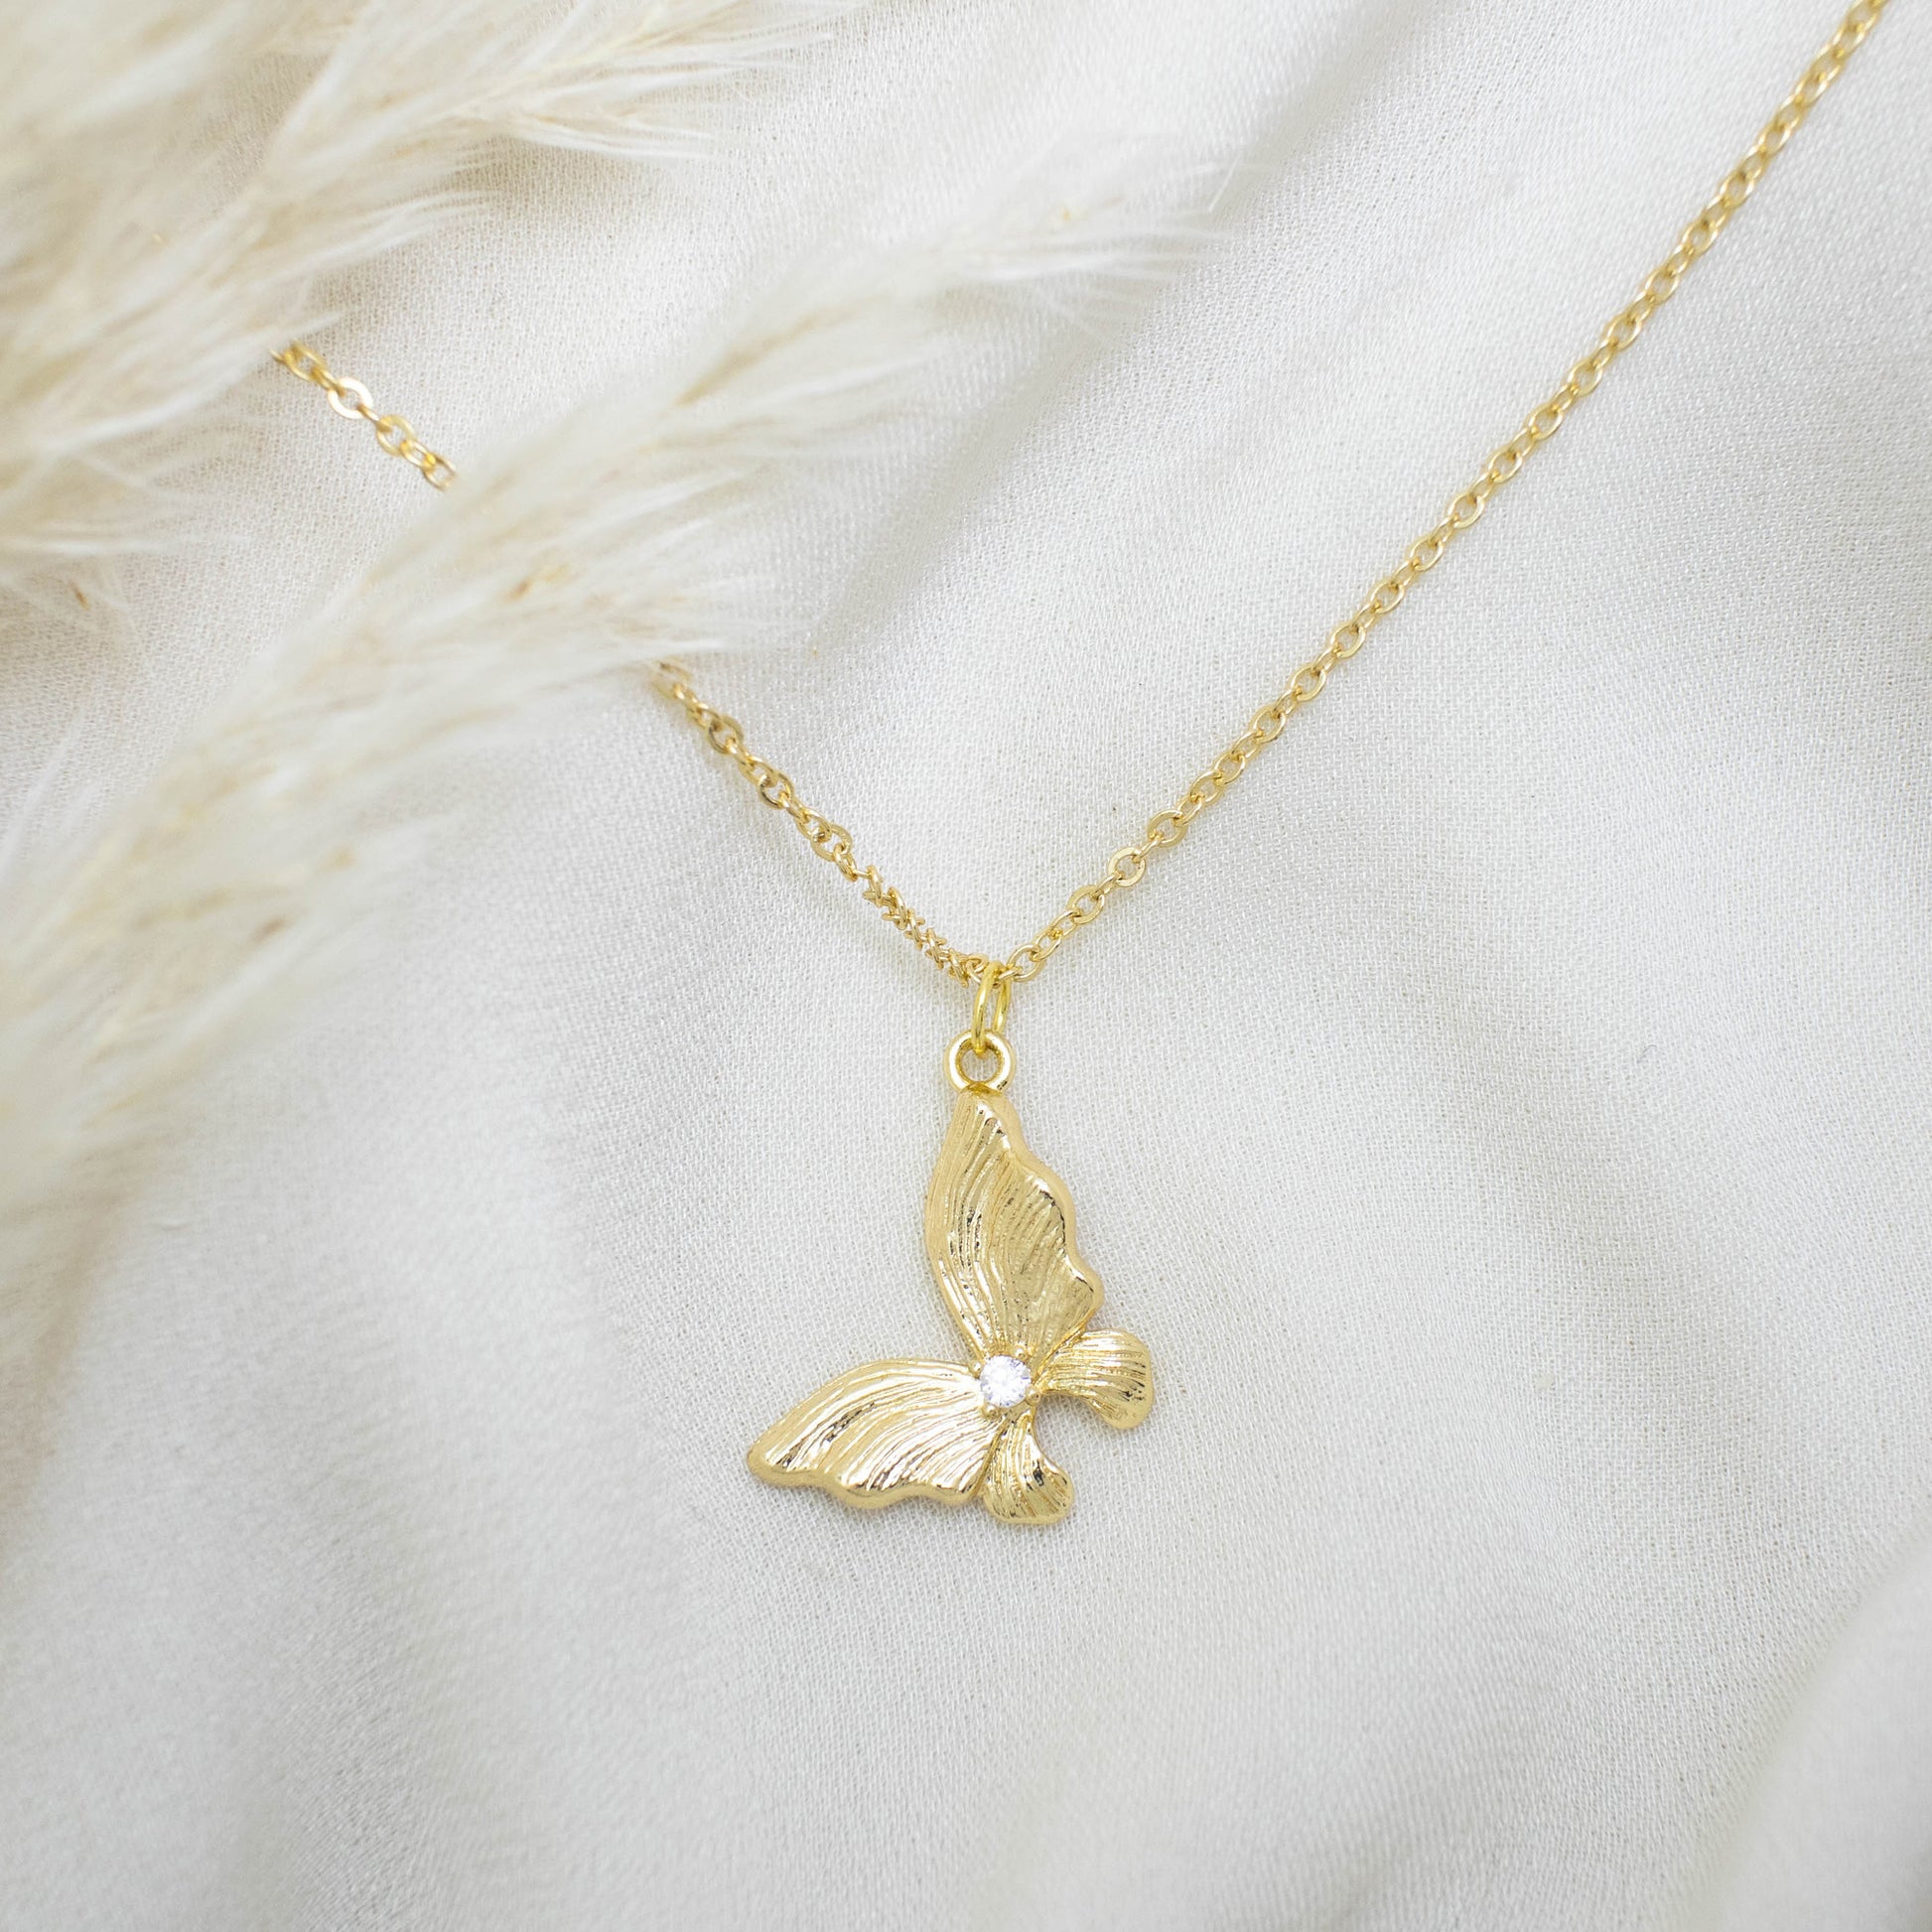 This photo features a thin chain necklace made of 14K gold-plated sterling silver, paired with Gold Butterfly Necklace